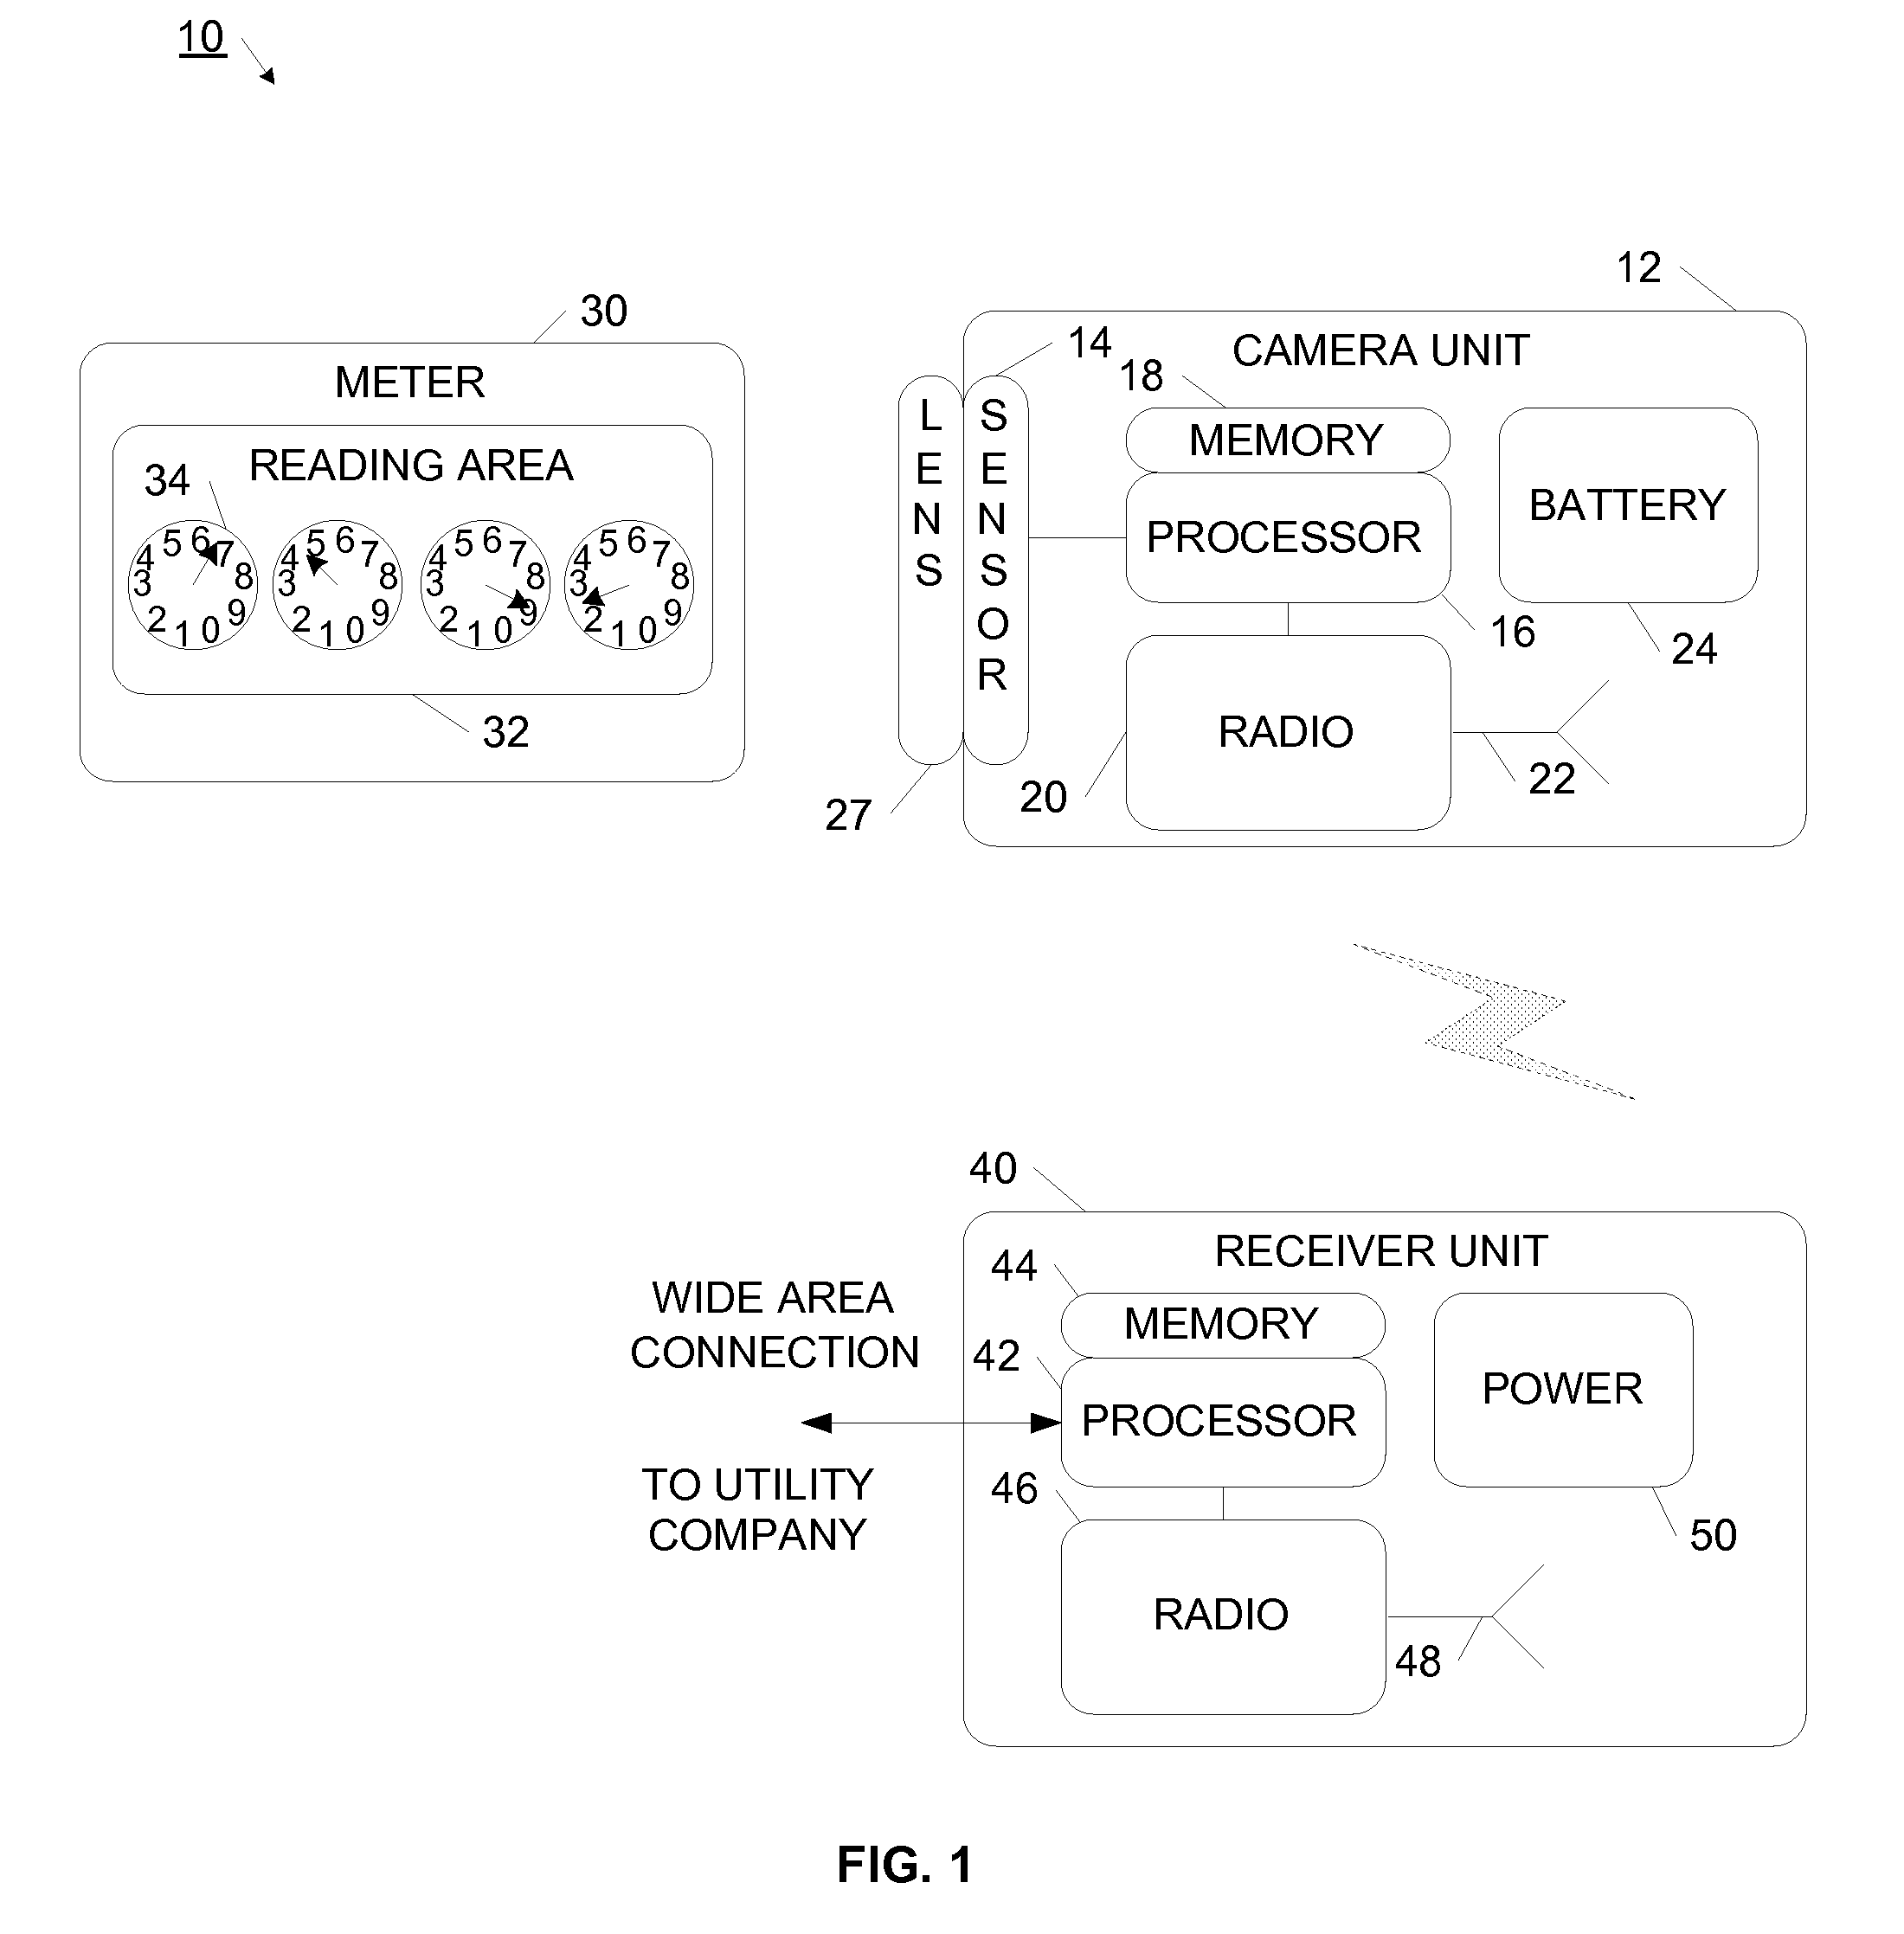 Remote meter reader using a network sensor system and protocol